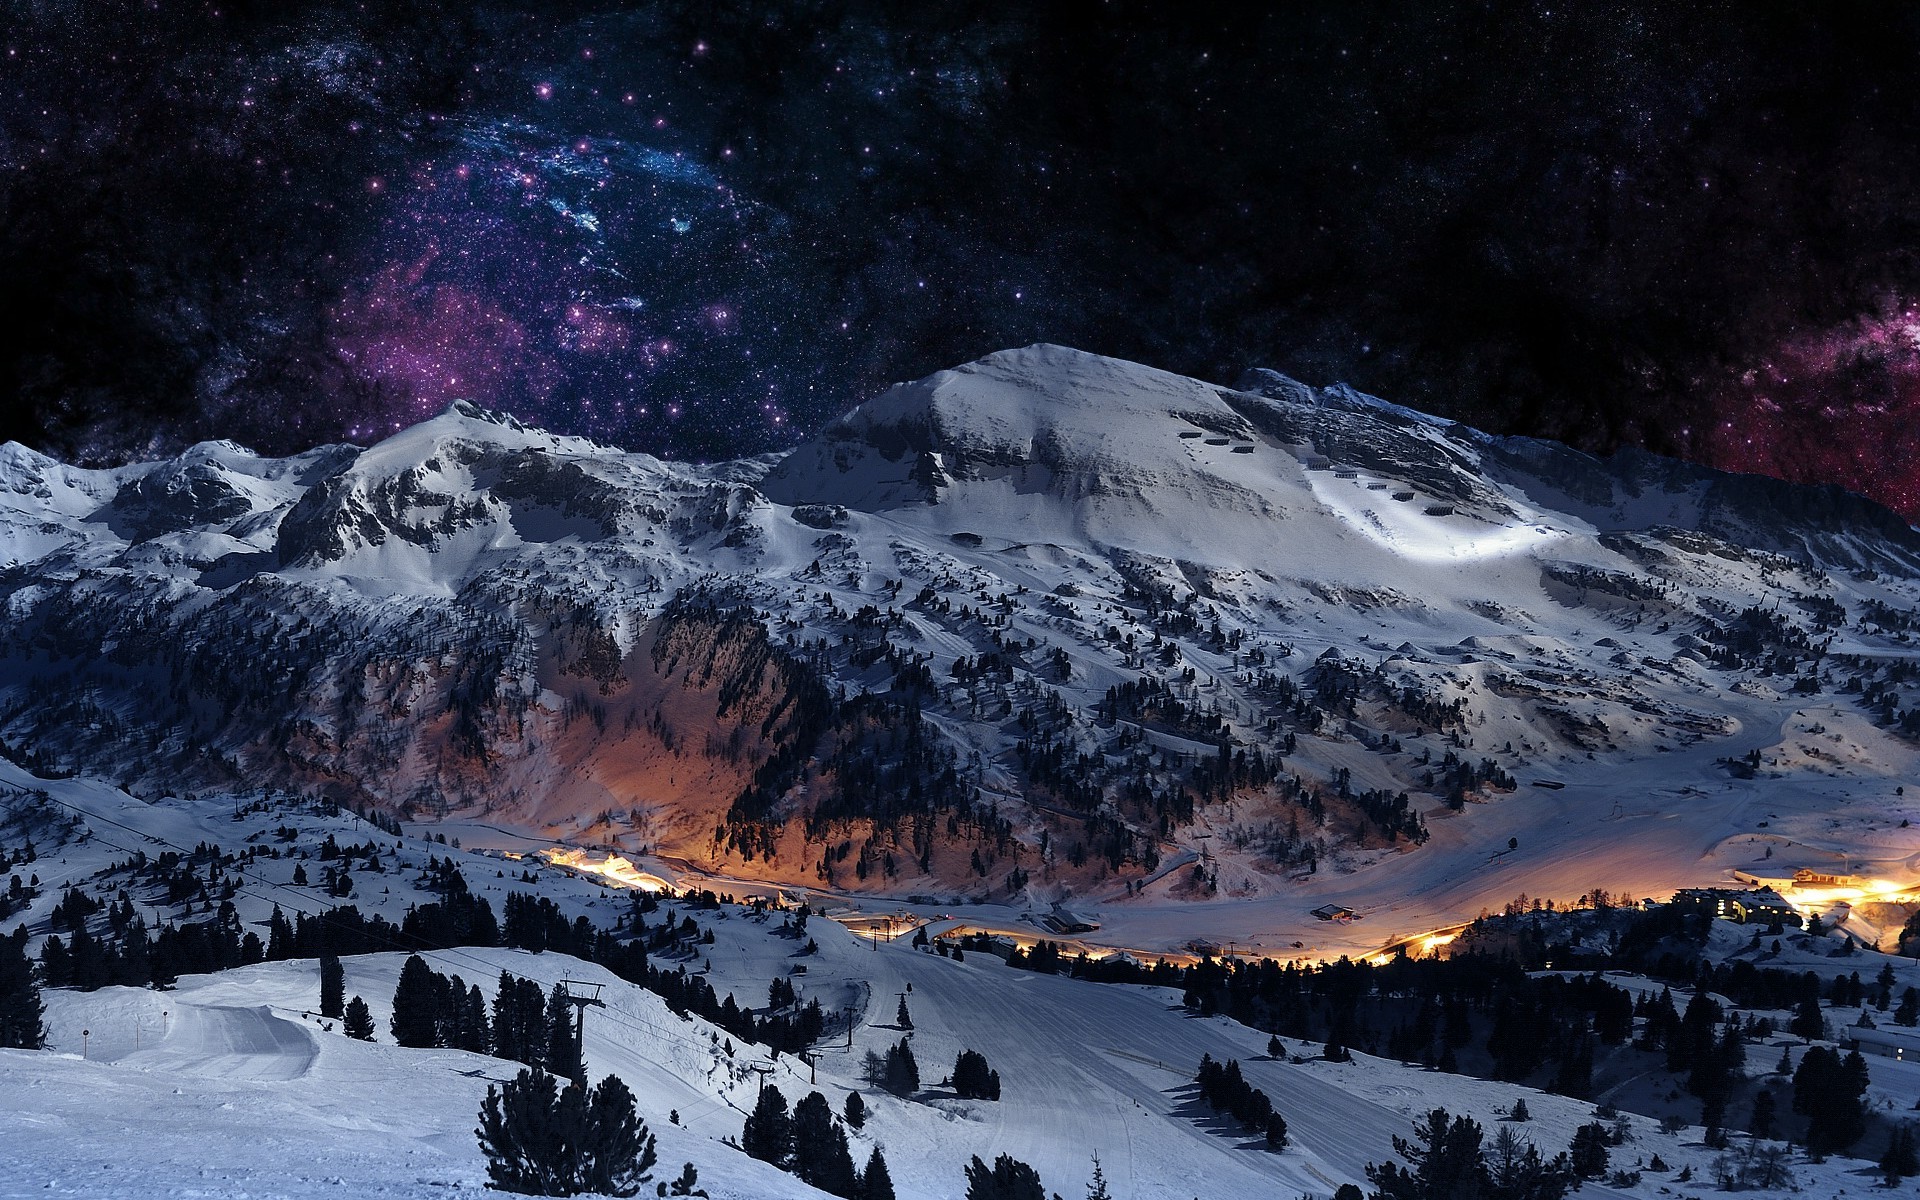 Wallpaper, landscape, night, nature, sky, snow, winter, purple, stars, blue, evening, atmosphere, valley, mount scenery, Freezing, summit, midnight, tree, Massif, darkness, 1920x1200 px, computer wallpaper, outer space, geological phenomenon, mountain